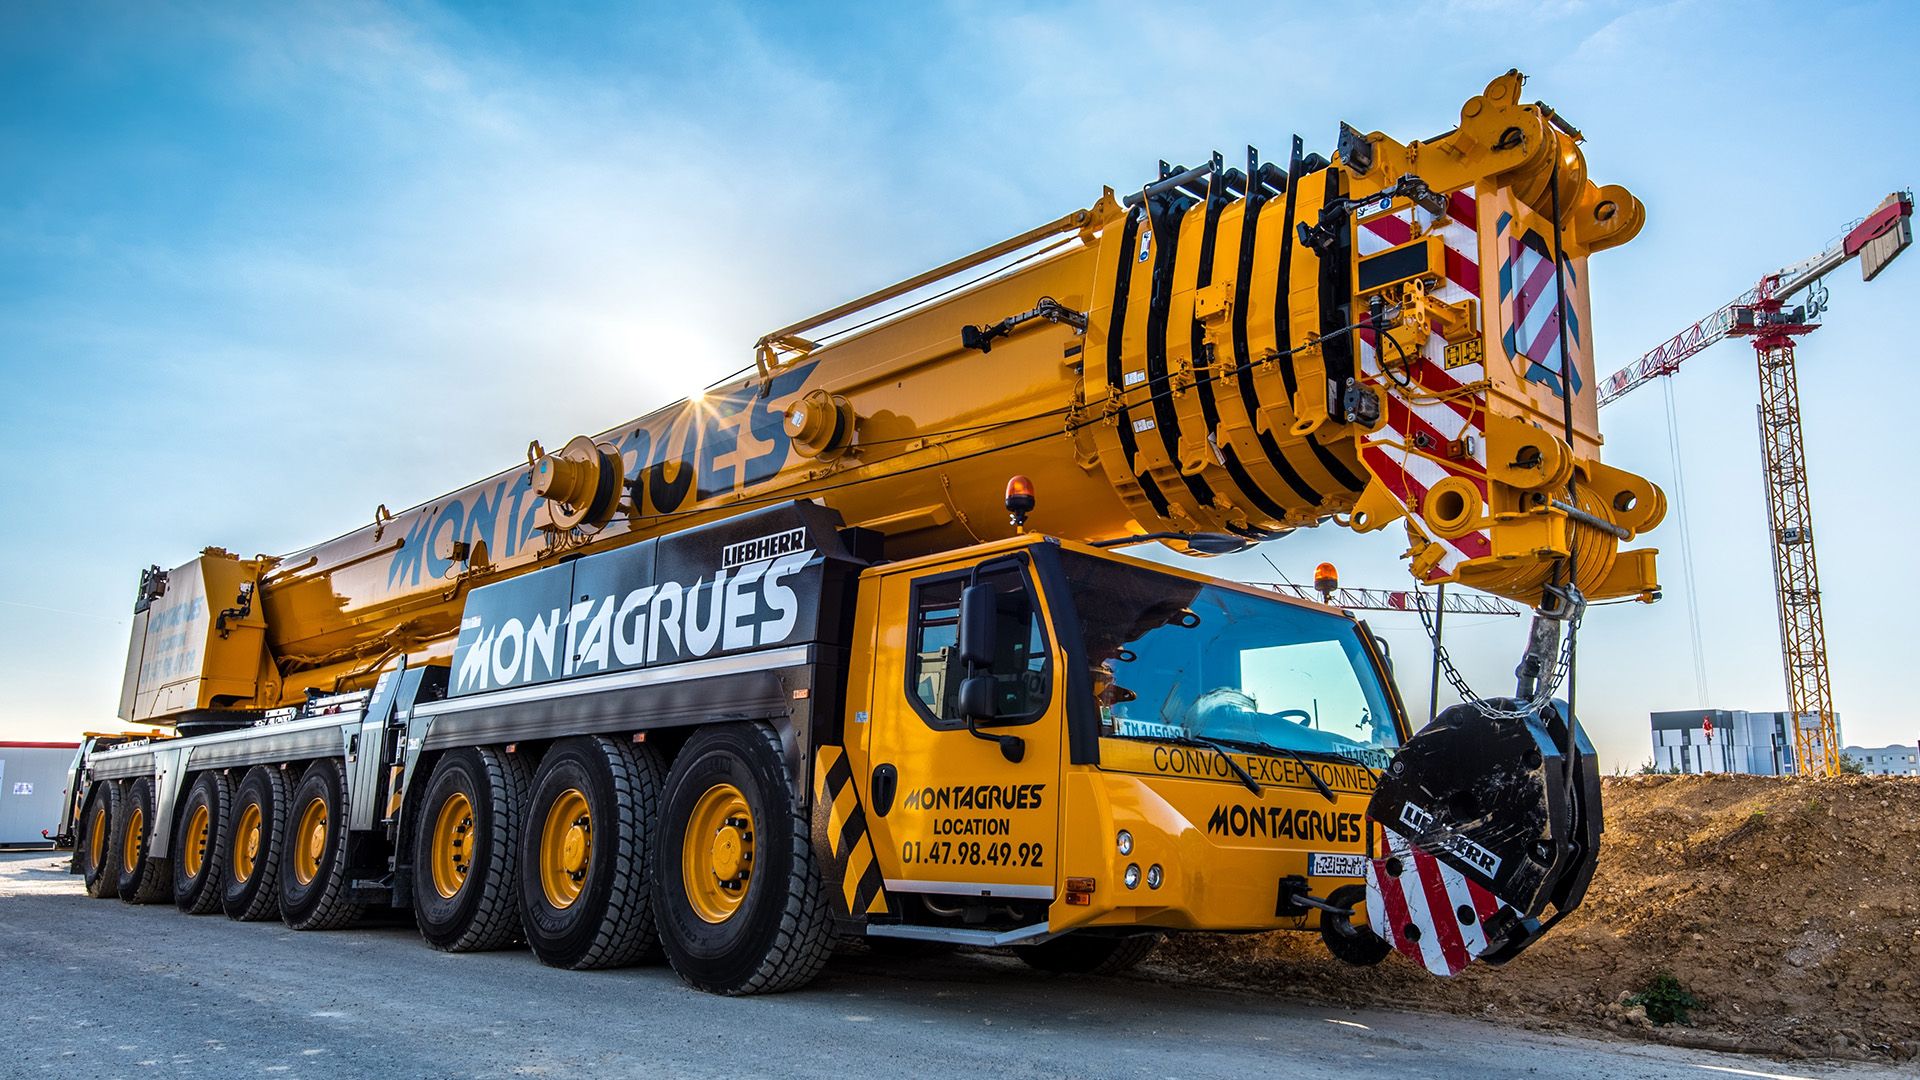 Montagrues has been acquired by Group Plissonneau